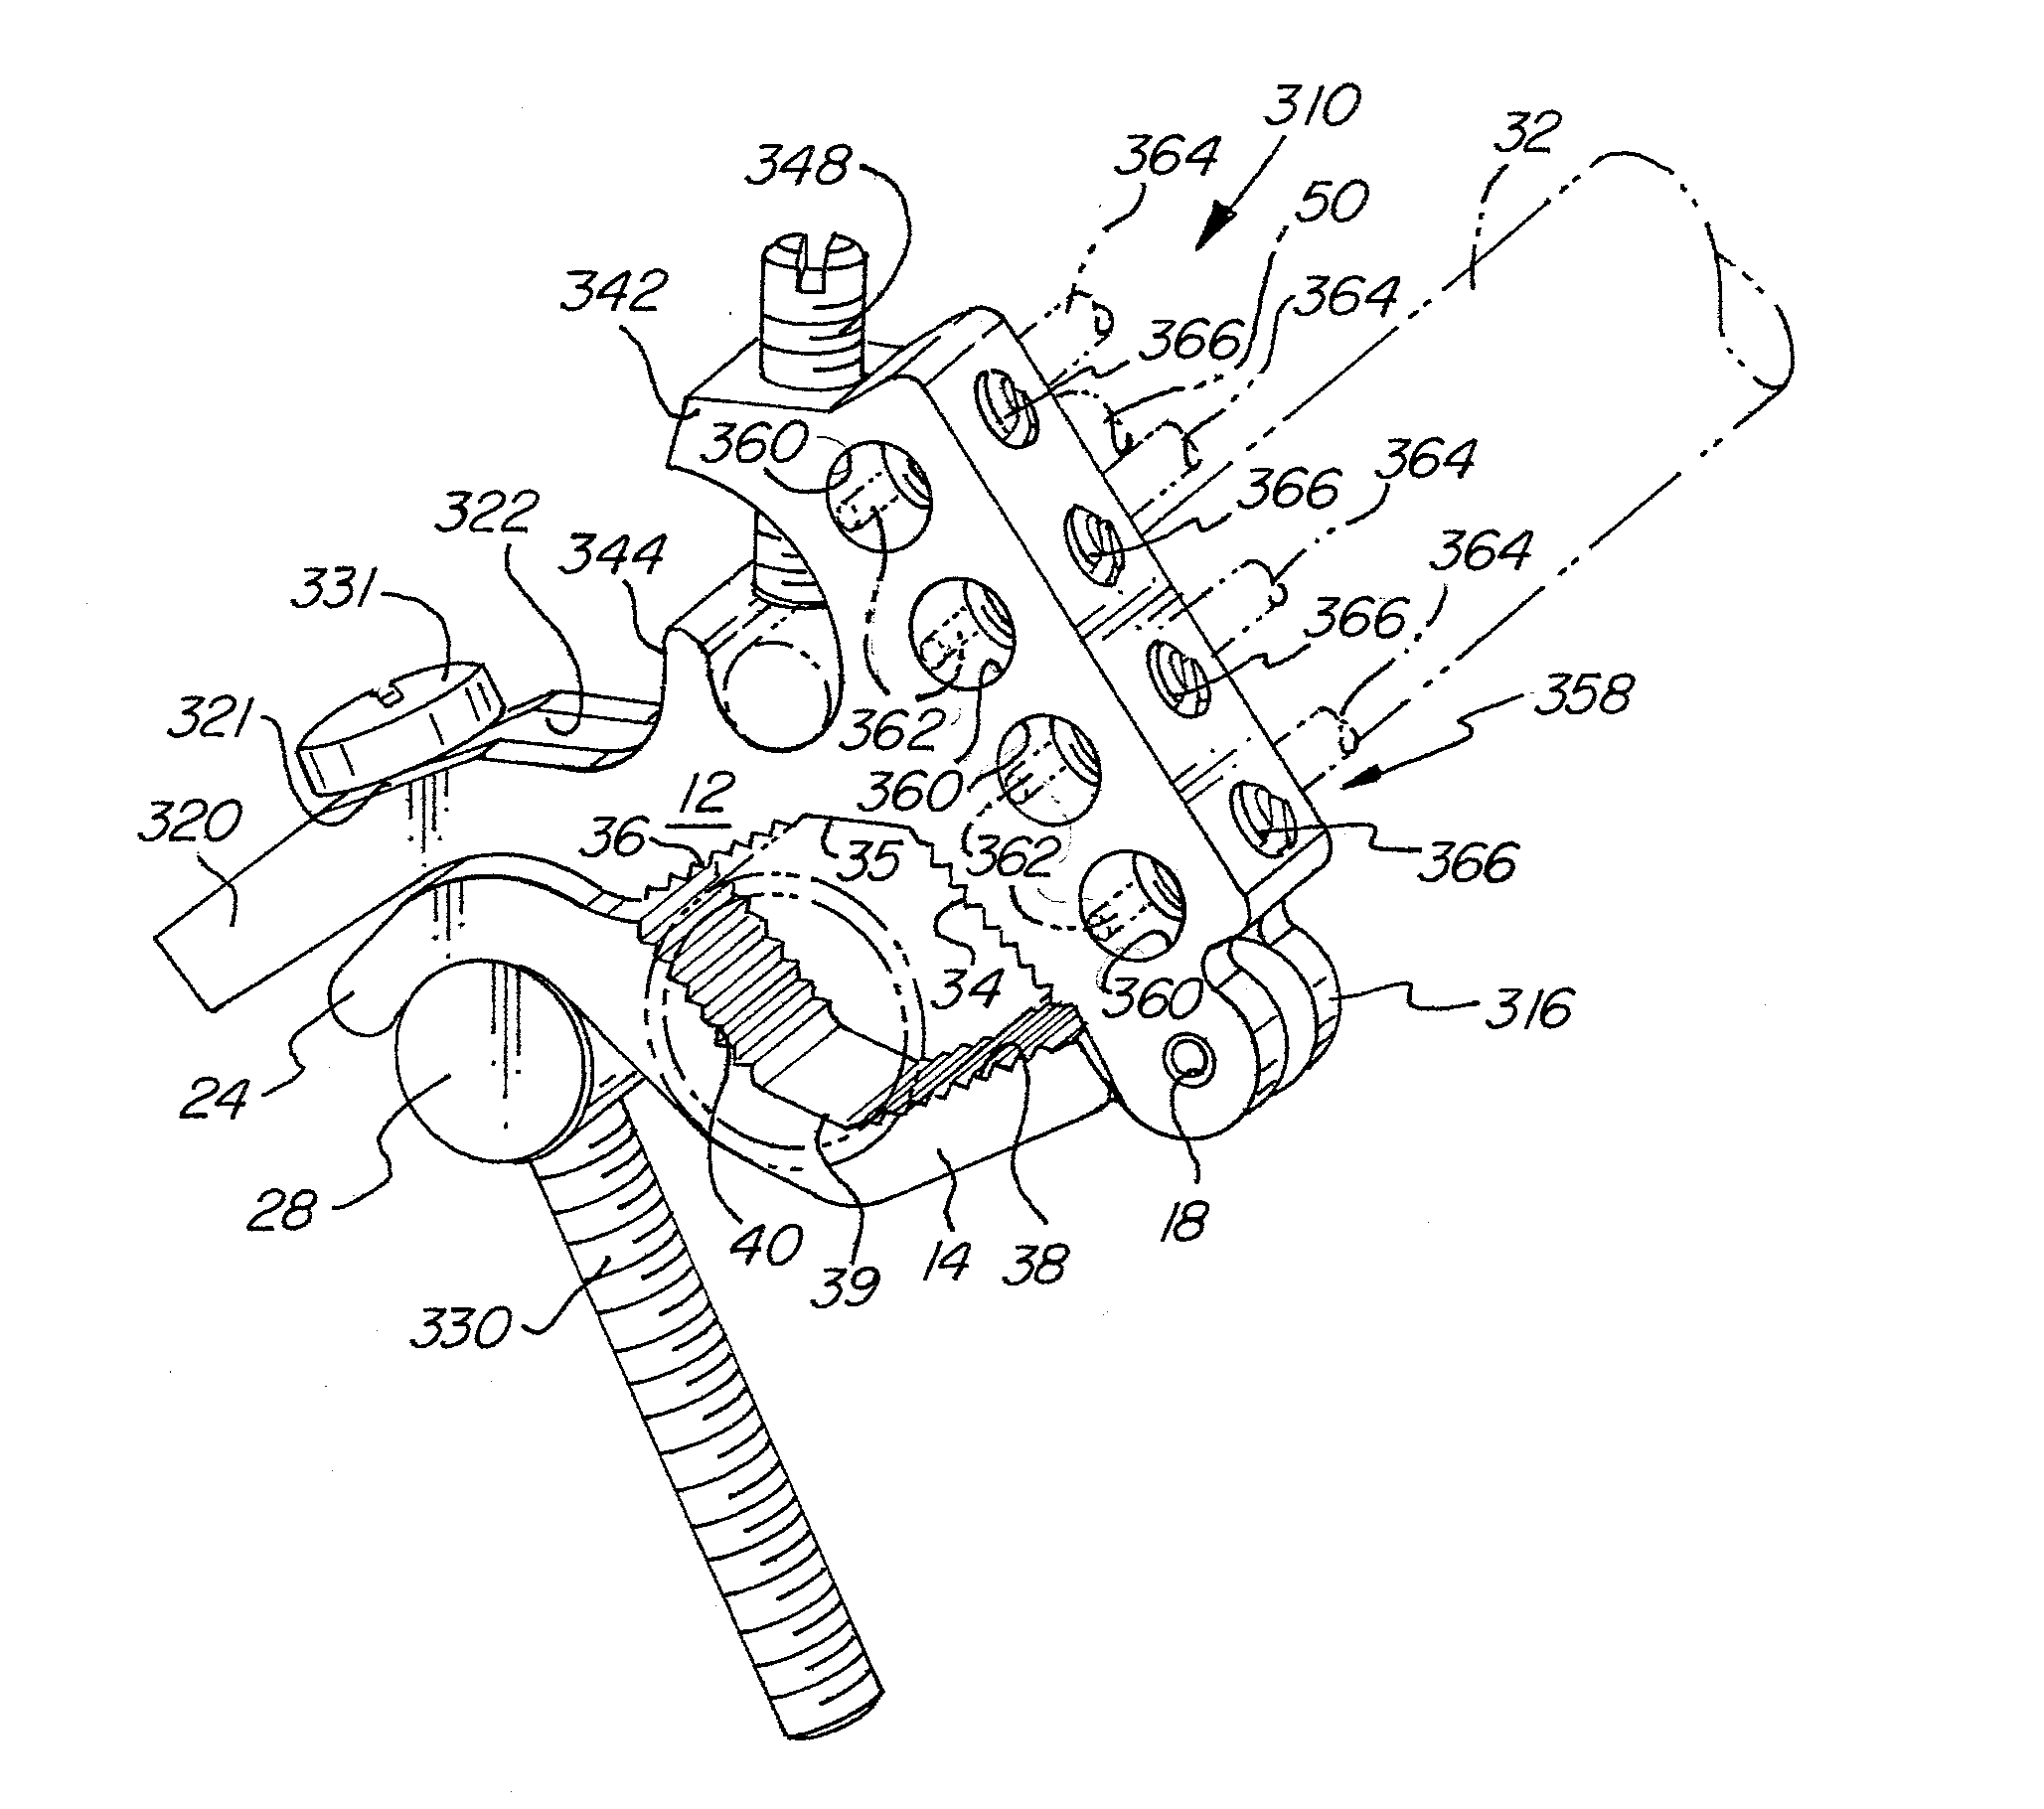 Electric ground clamp with pivoted jaws and single attached adjusting bolt and terminal block